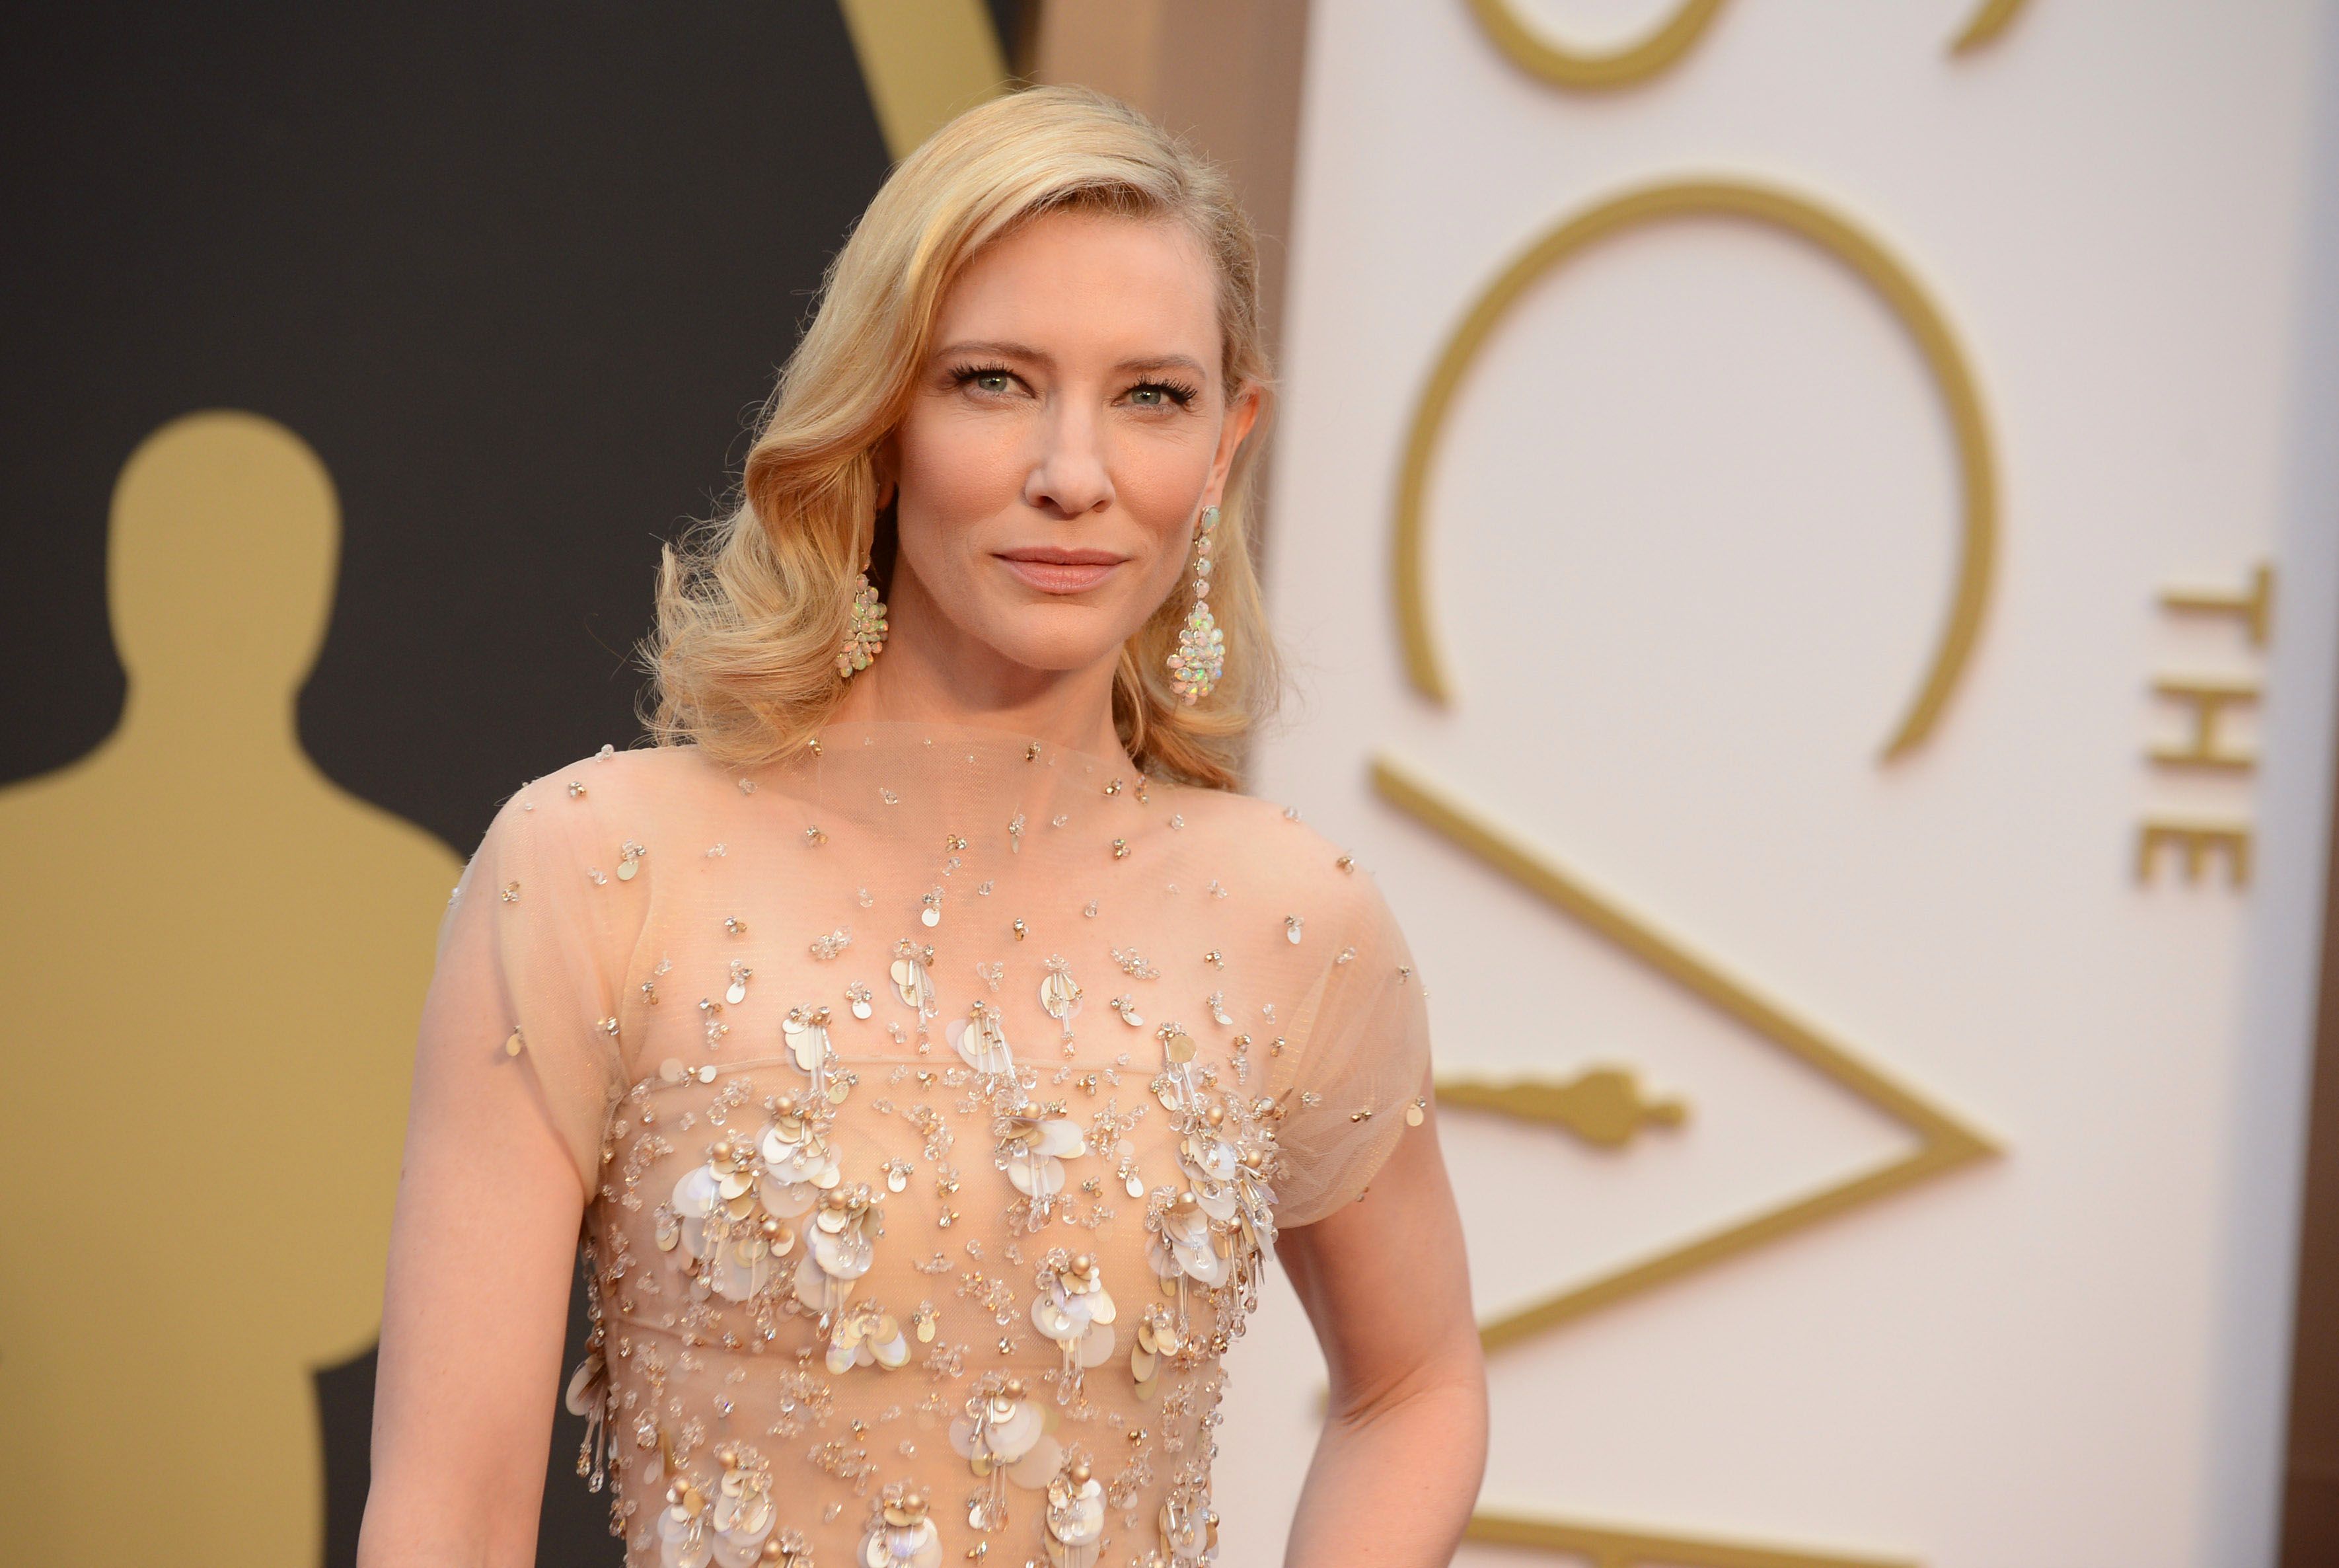 Cate Blanchett takes home Best Actress at the Oscars for Blue Jasmine